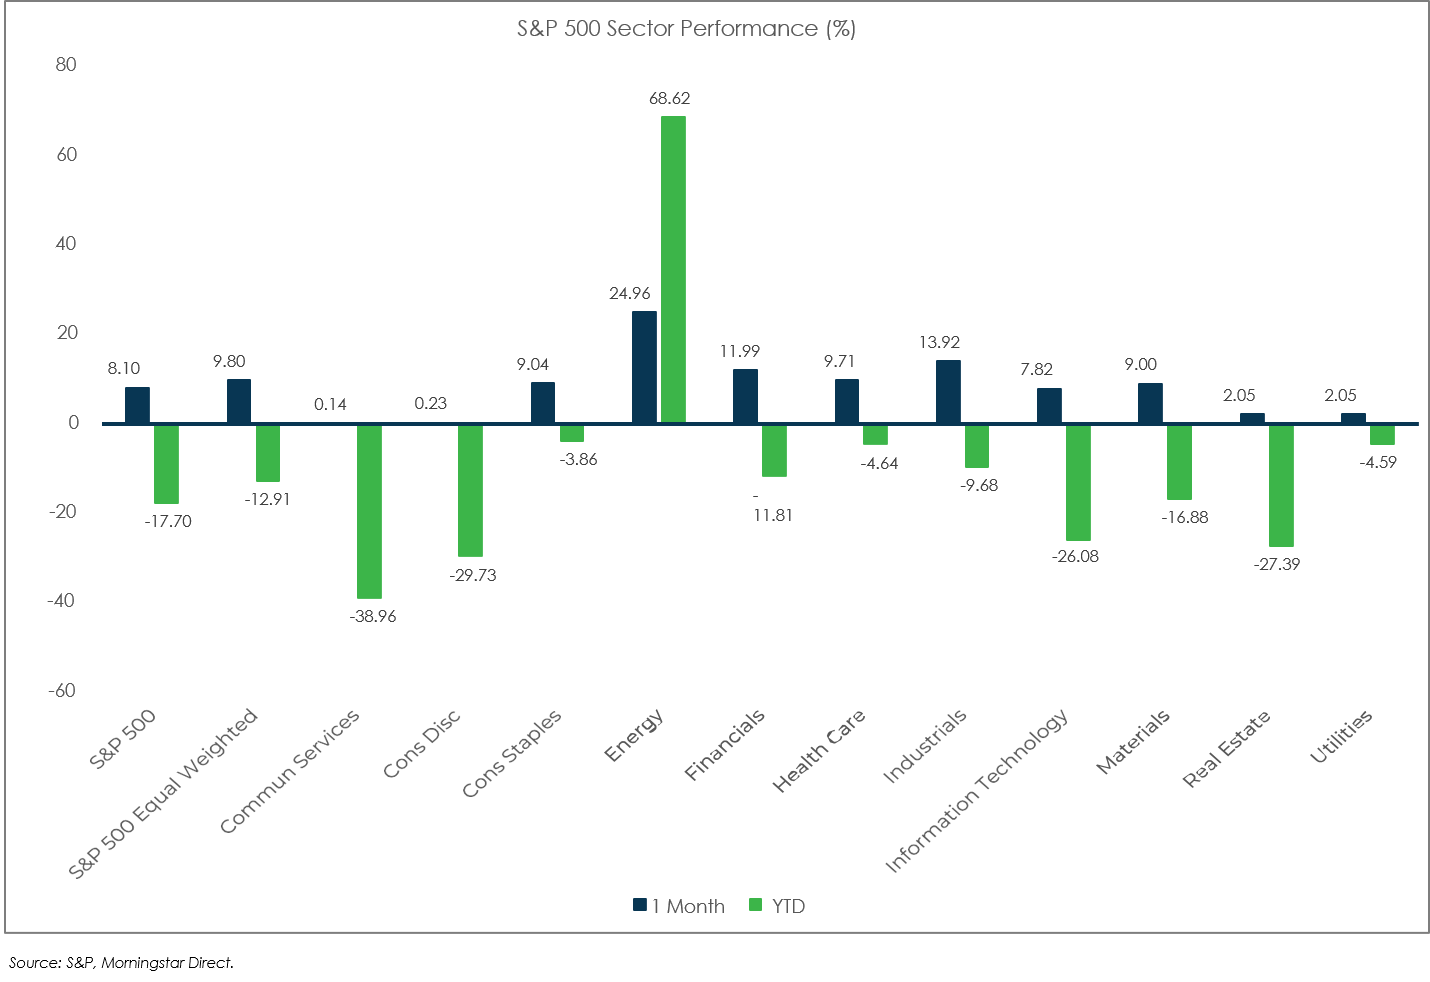 Sector Performance: S&P 500 - October 2022